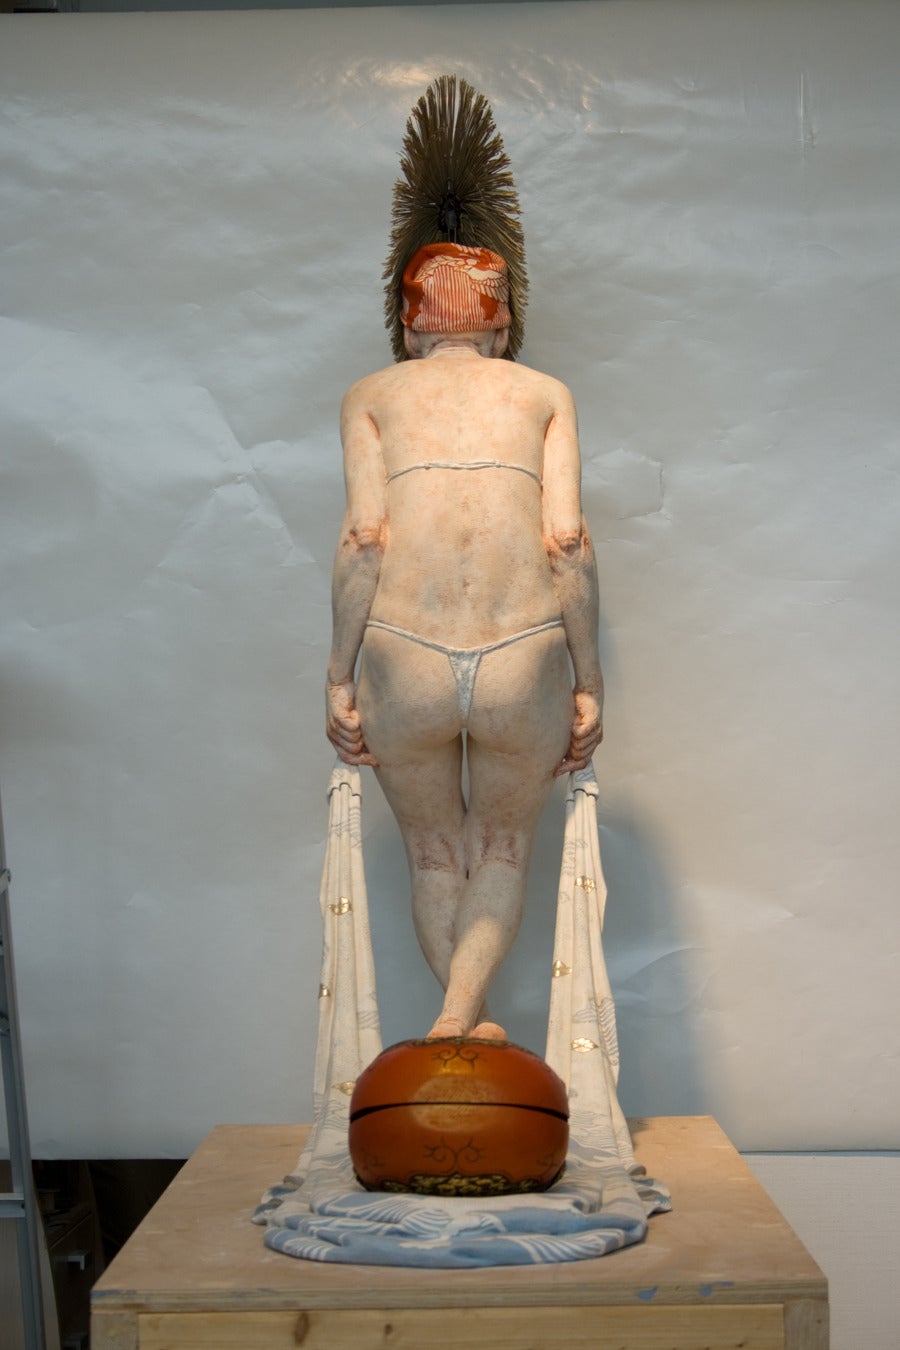 No. 10 - Sculpture by Chie Shimizu